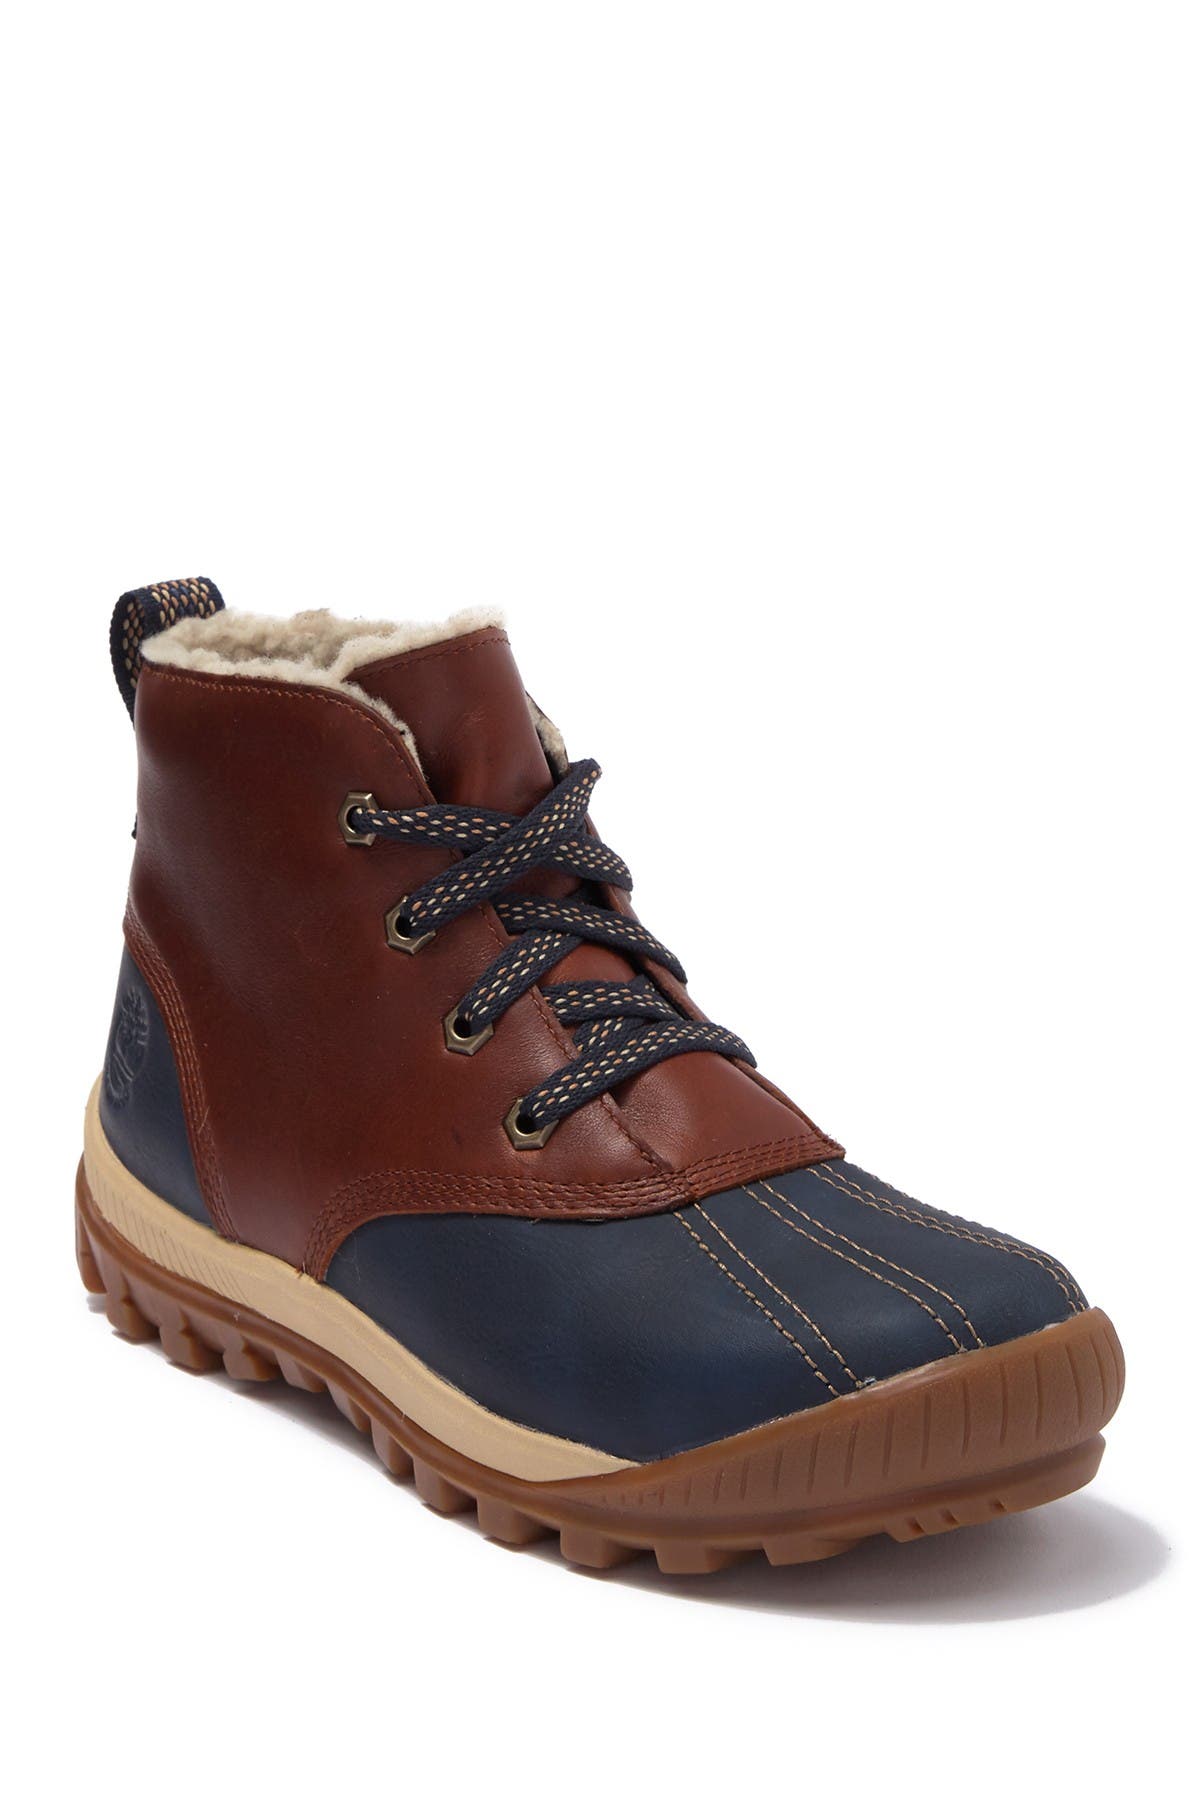 Timberland Women's Clothing | Nordstrom 